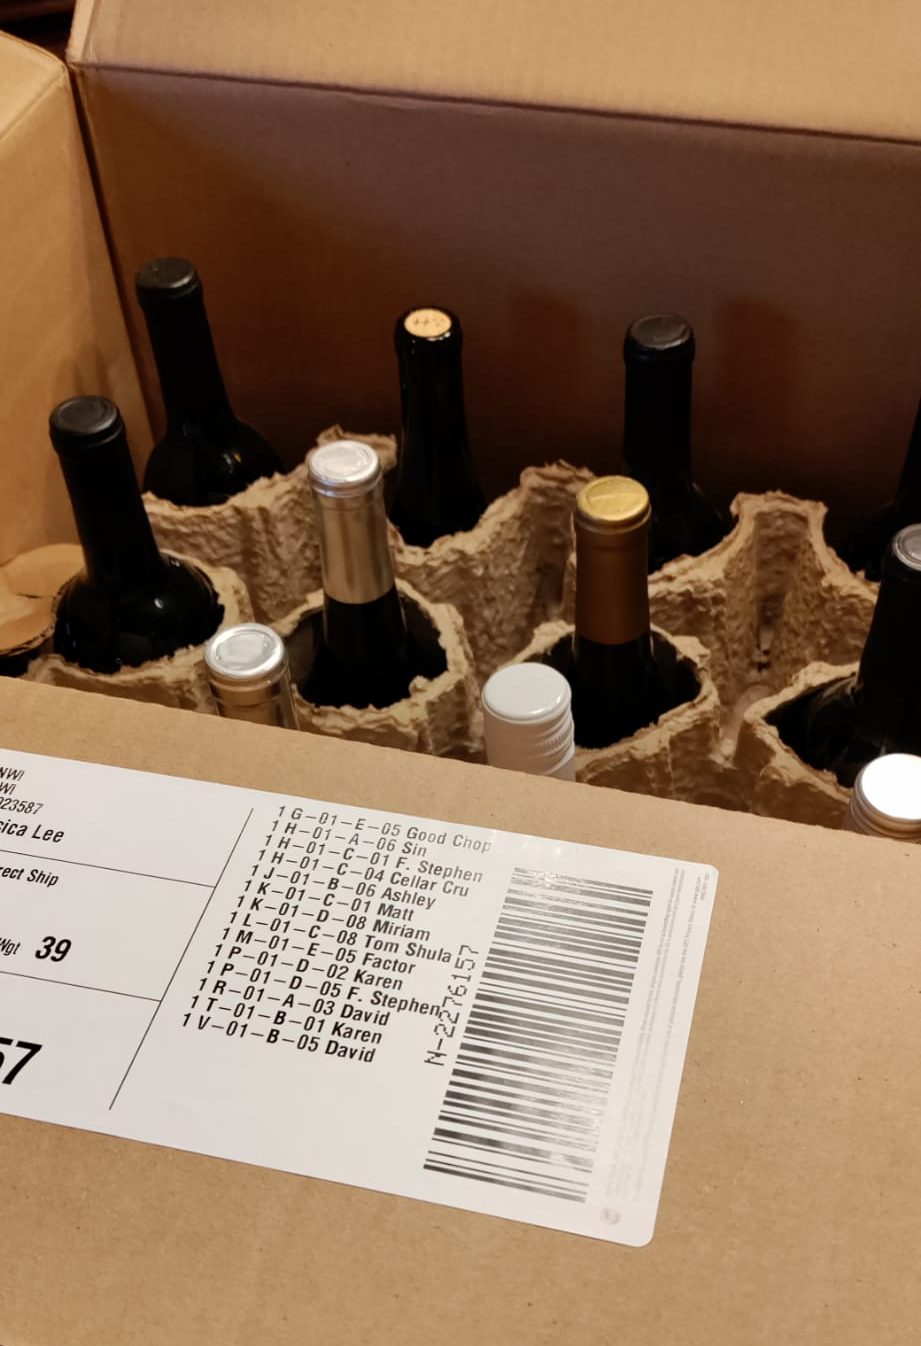 Shipment of wines from Naked Wines.